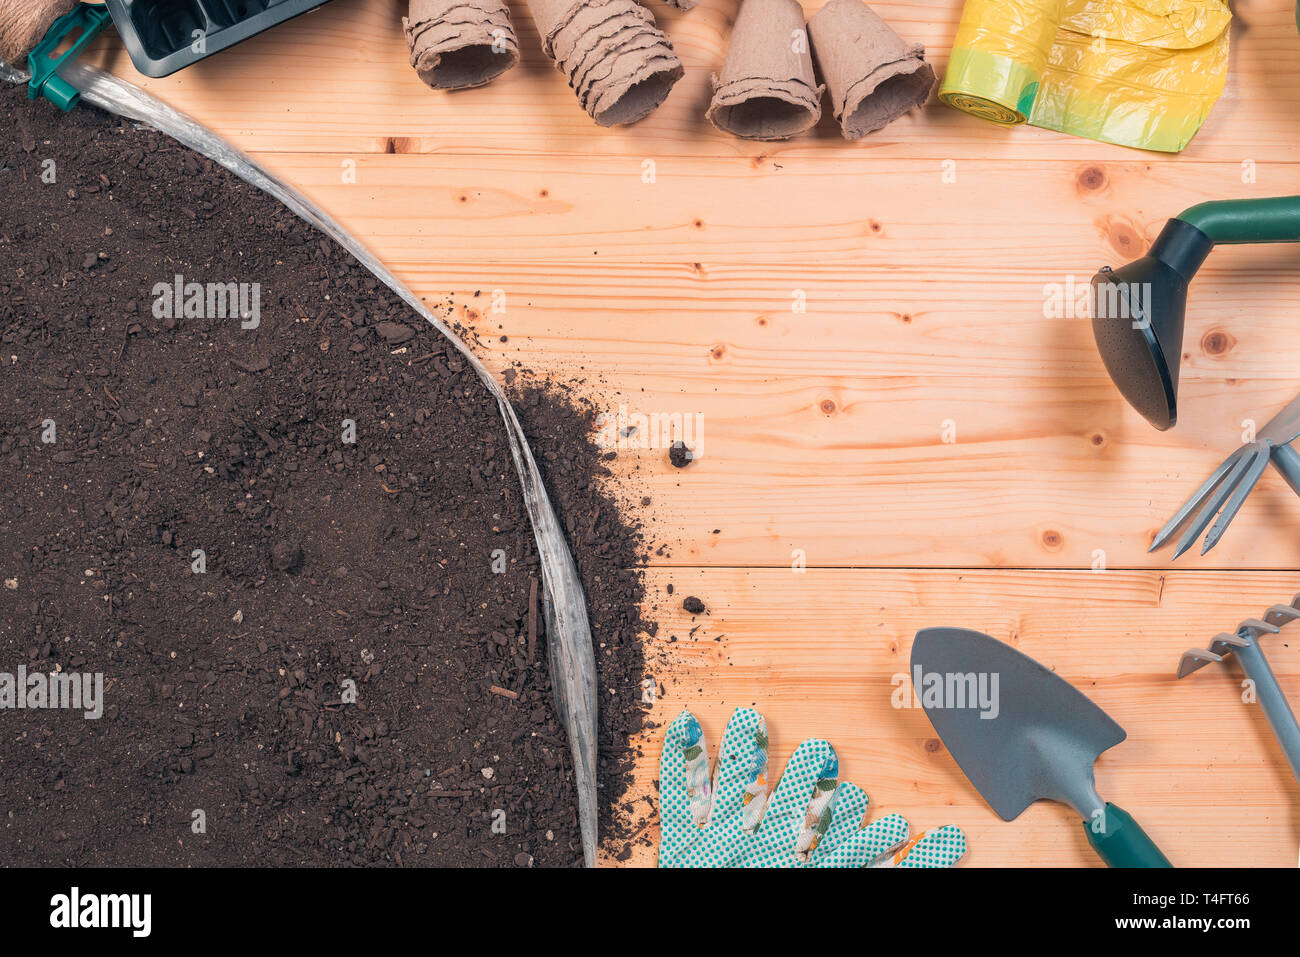 Gardening tools on potting soil, top view of equipment set on wooden background Stock Photo